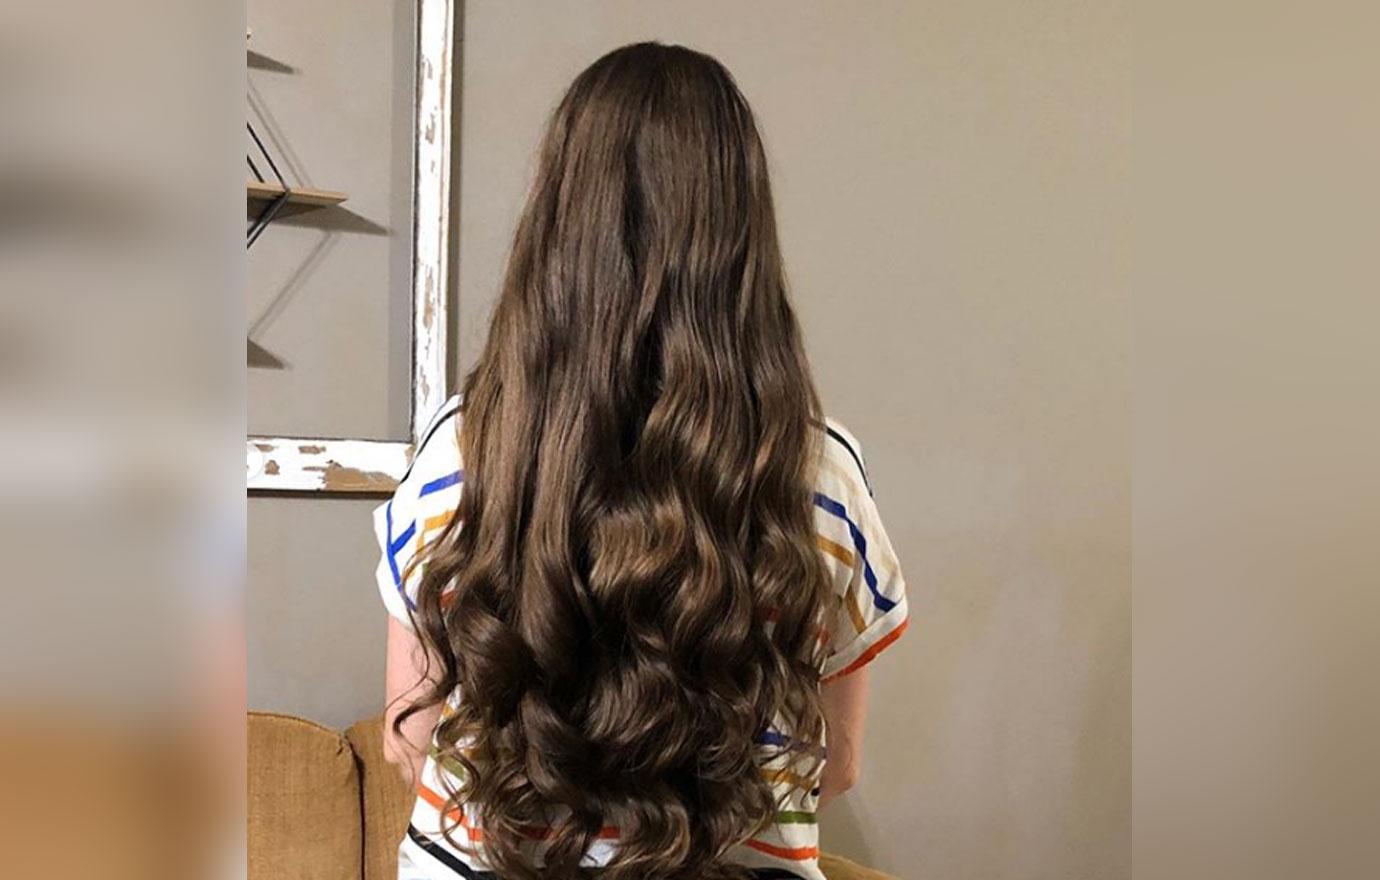 Jill Duggar Gets Her Hair Down Professionally For The First Time Ever